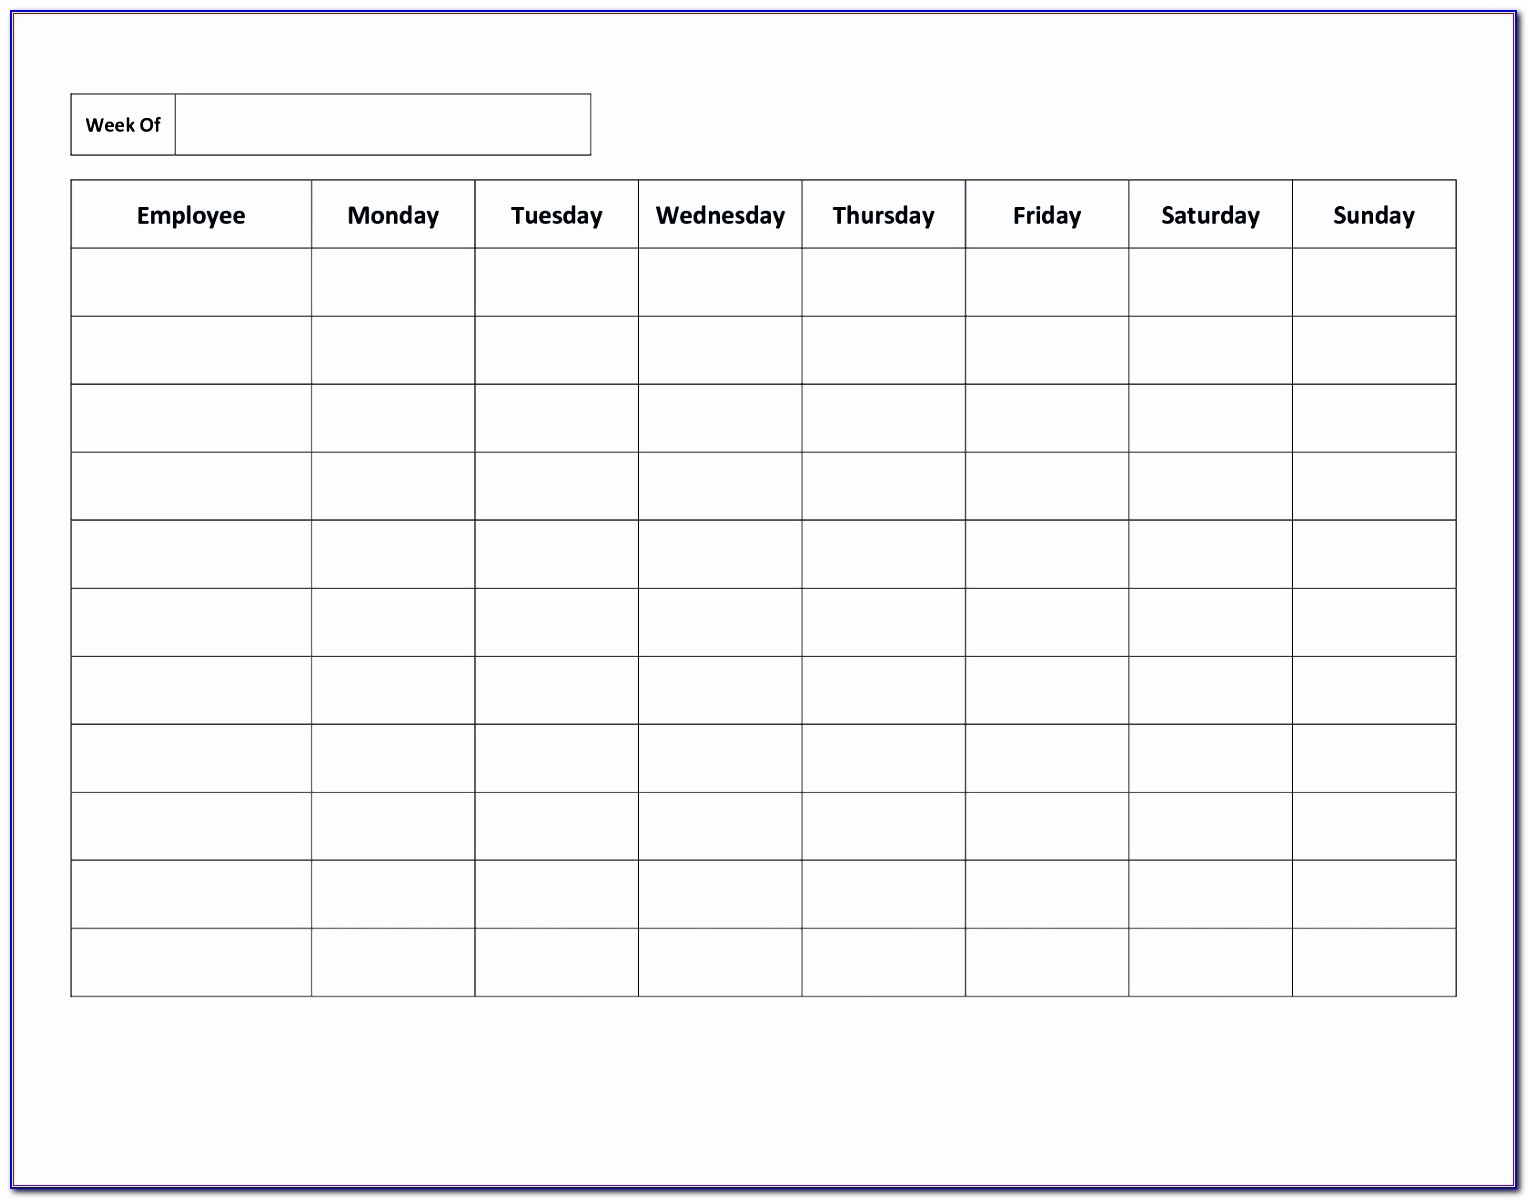 Free Employee Lunch Schedule Template